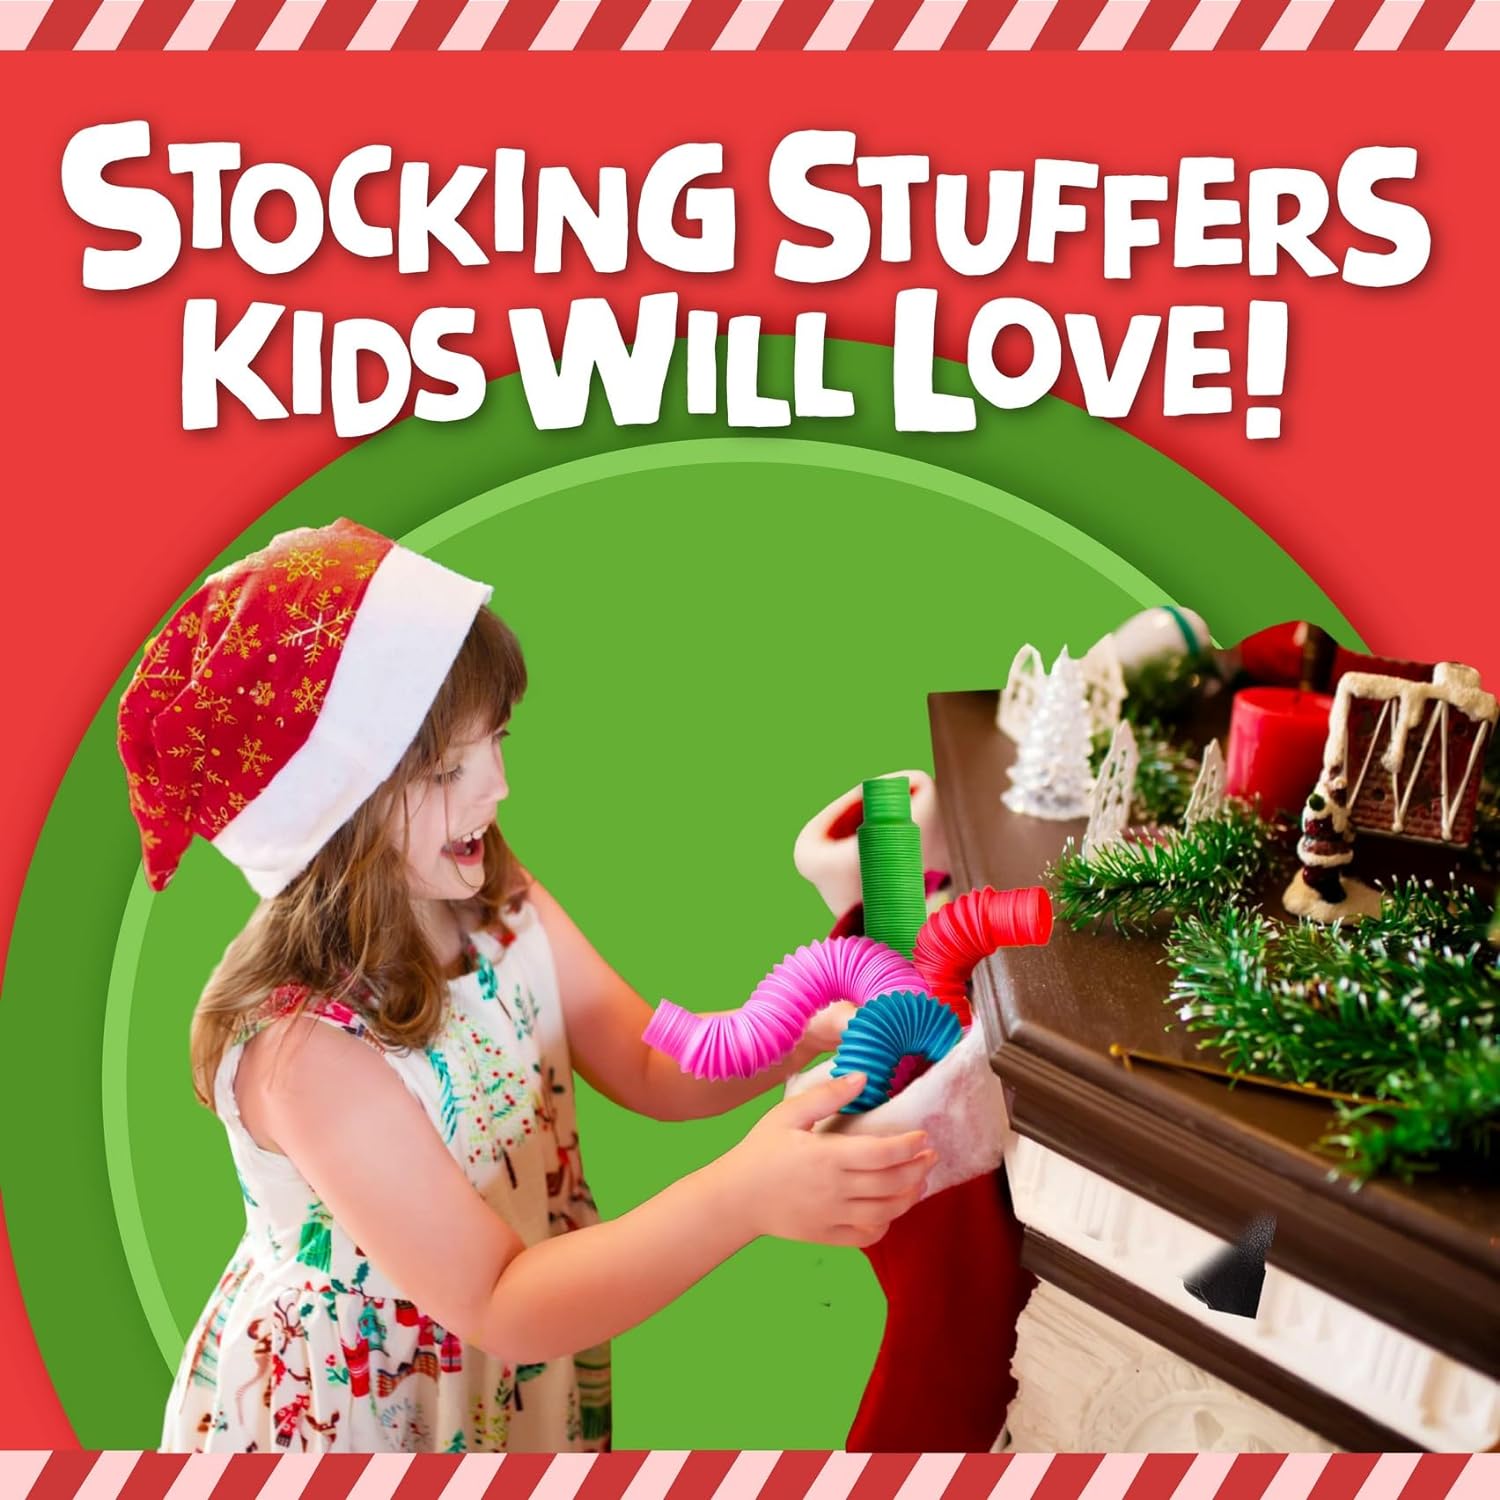 BUNMO Stocking Stuffers | Pop Tubes Large 4pk | Imaginative Play  Stimulating Creative Learning | Montessori Sensory Toys Ages 3 4 5 6 7 8 Years Old | Toddler Toys Stocking Stuffers for Kids Boys